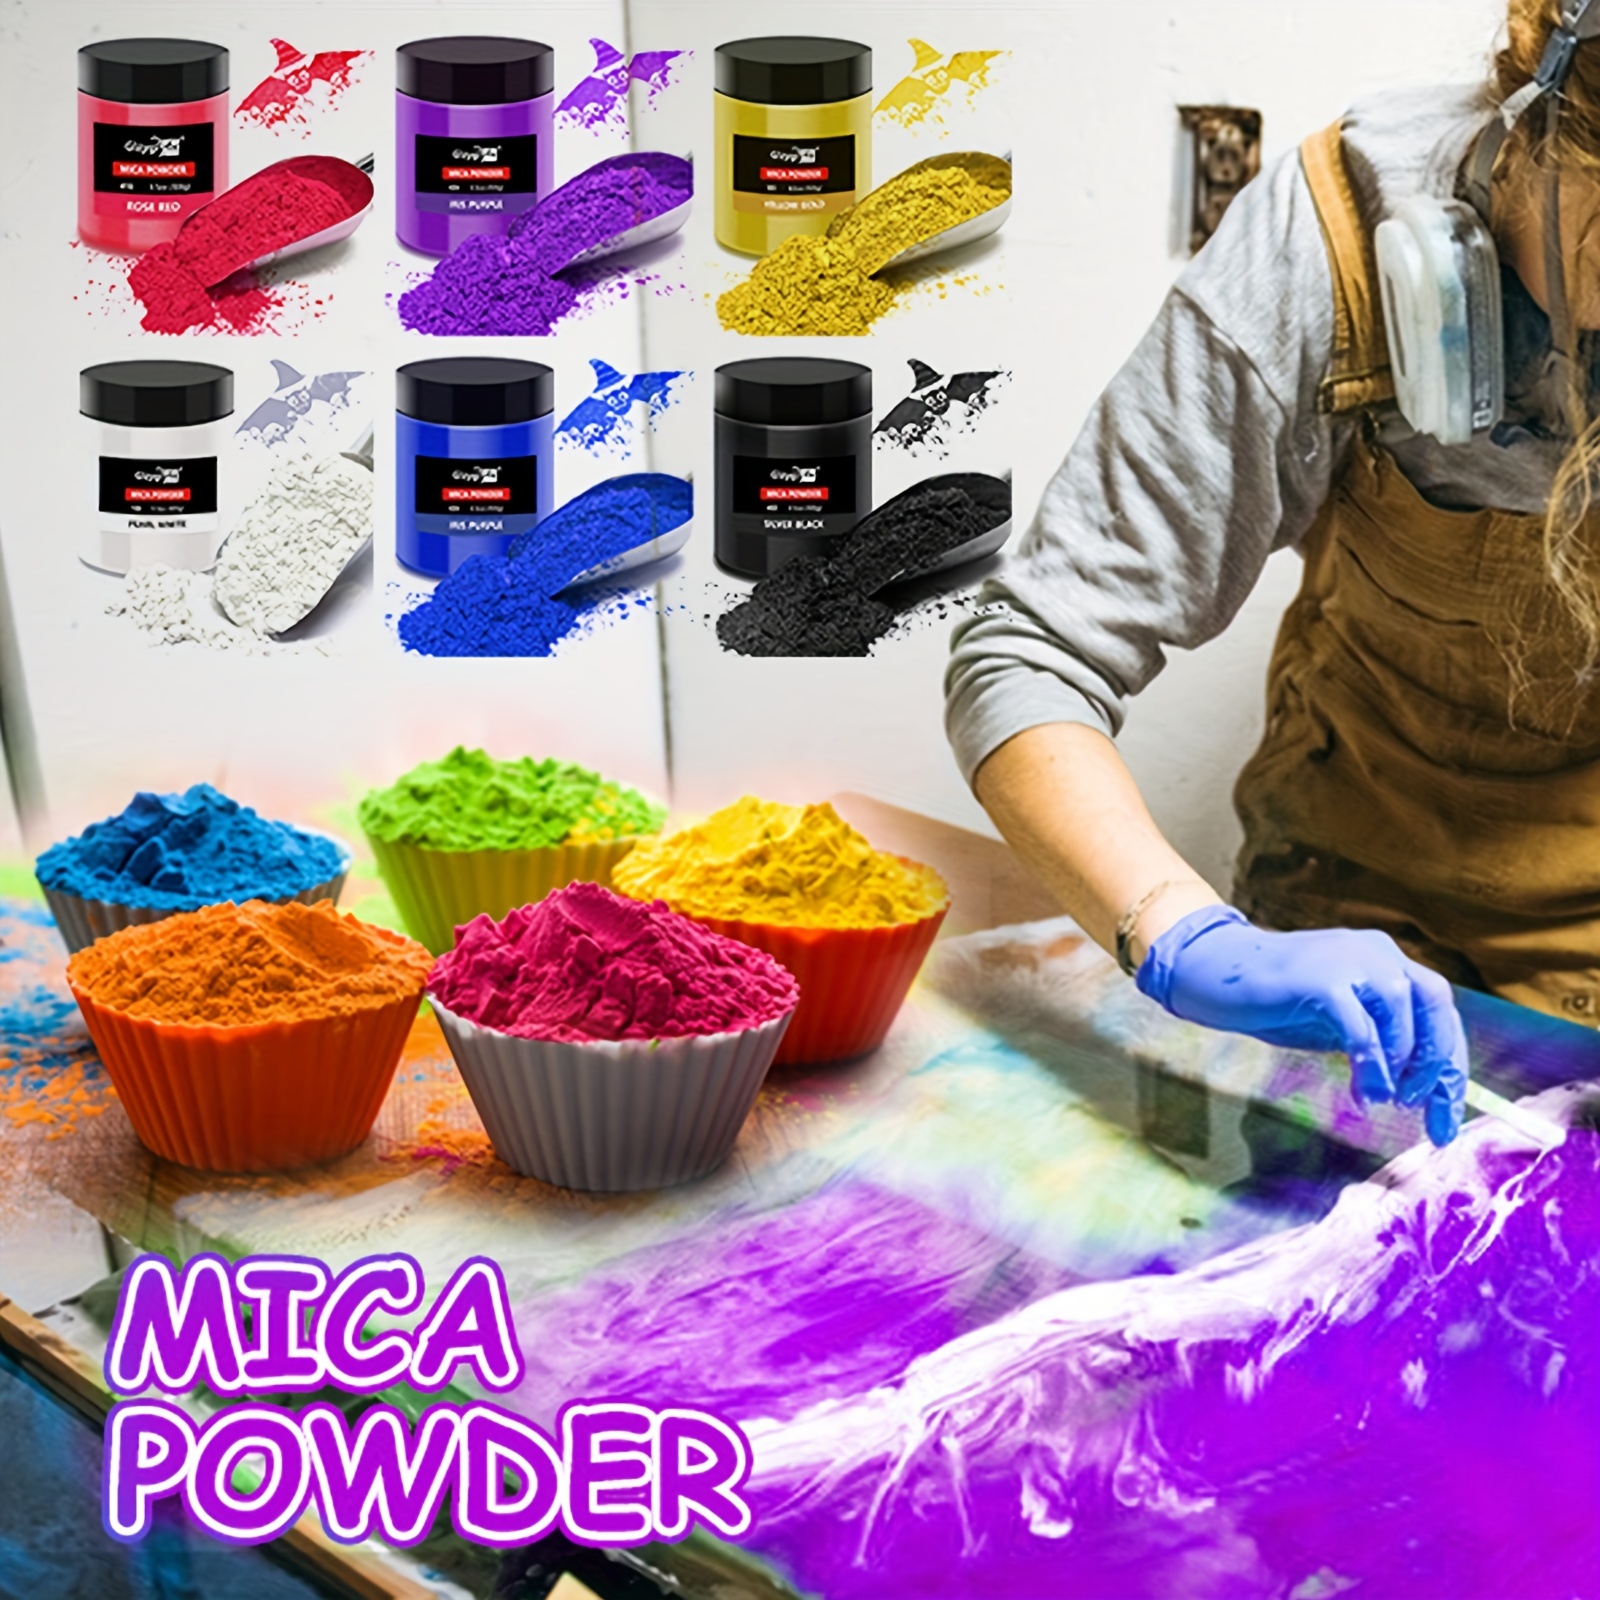 How to Use Mica Colorants in Making Soap